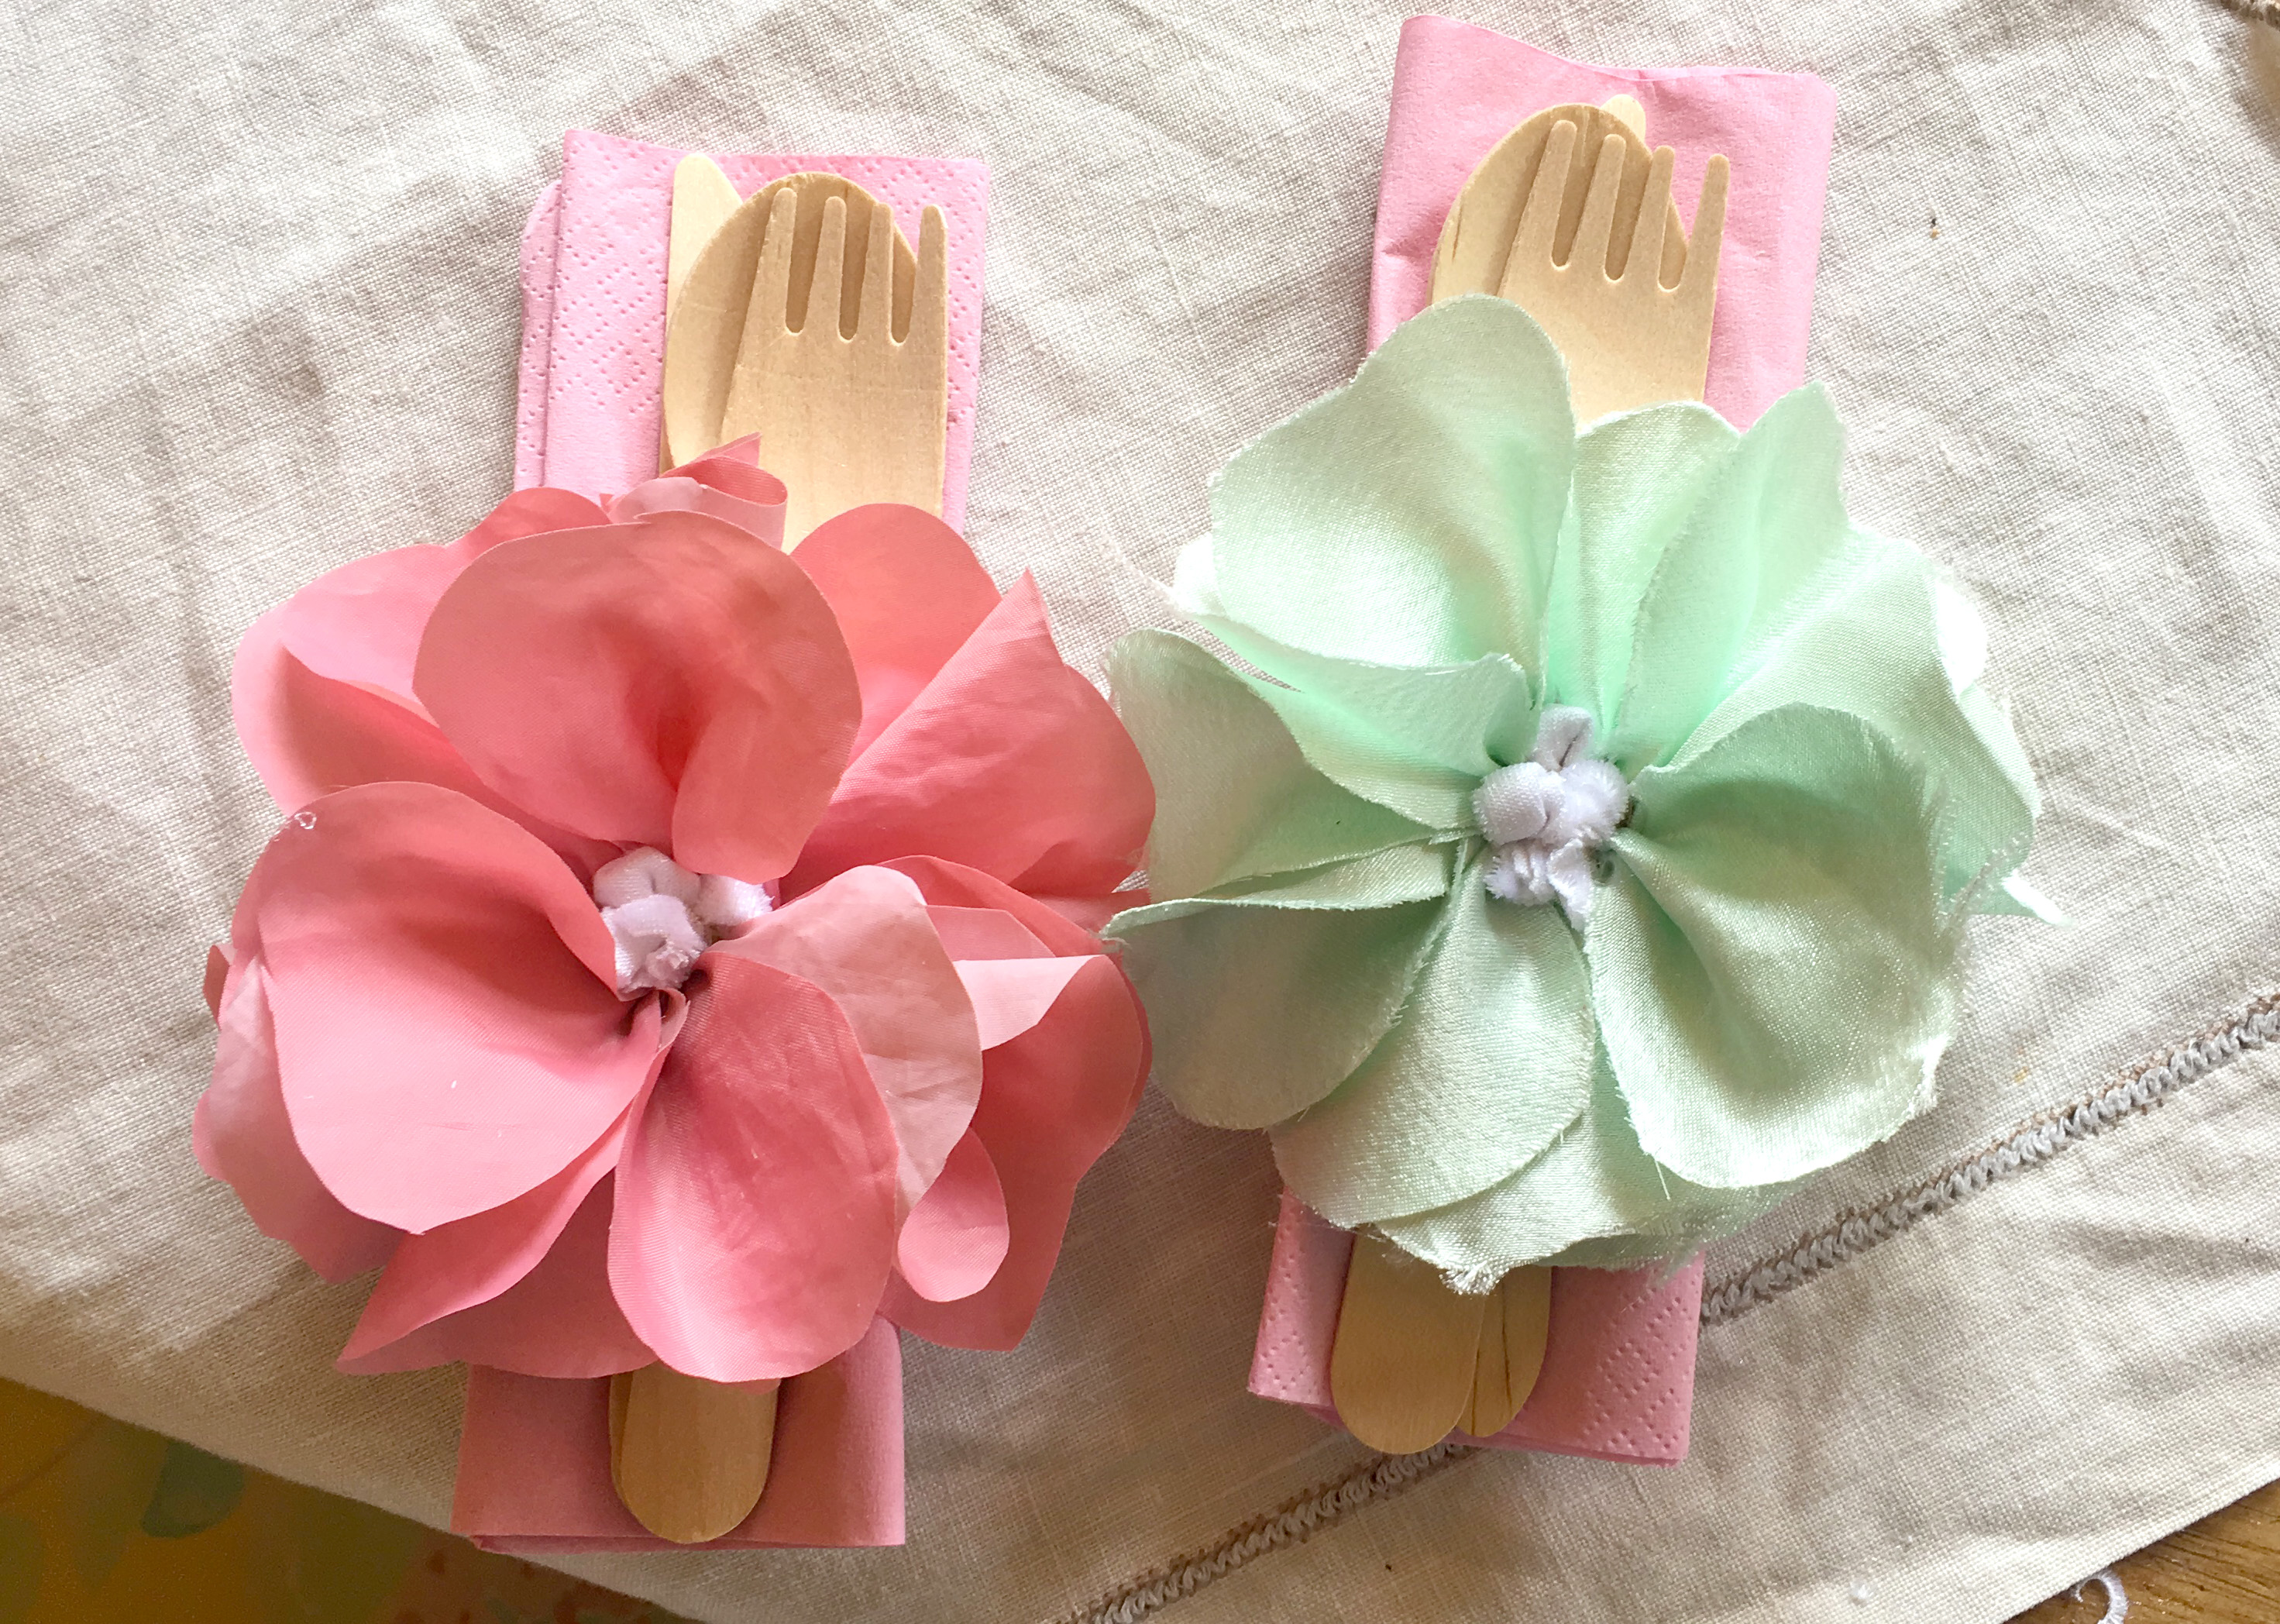 Rag Rug Napkin rings with cute rag rug flowers in pink and blue for a picnic